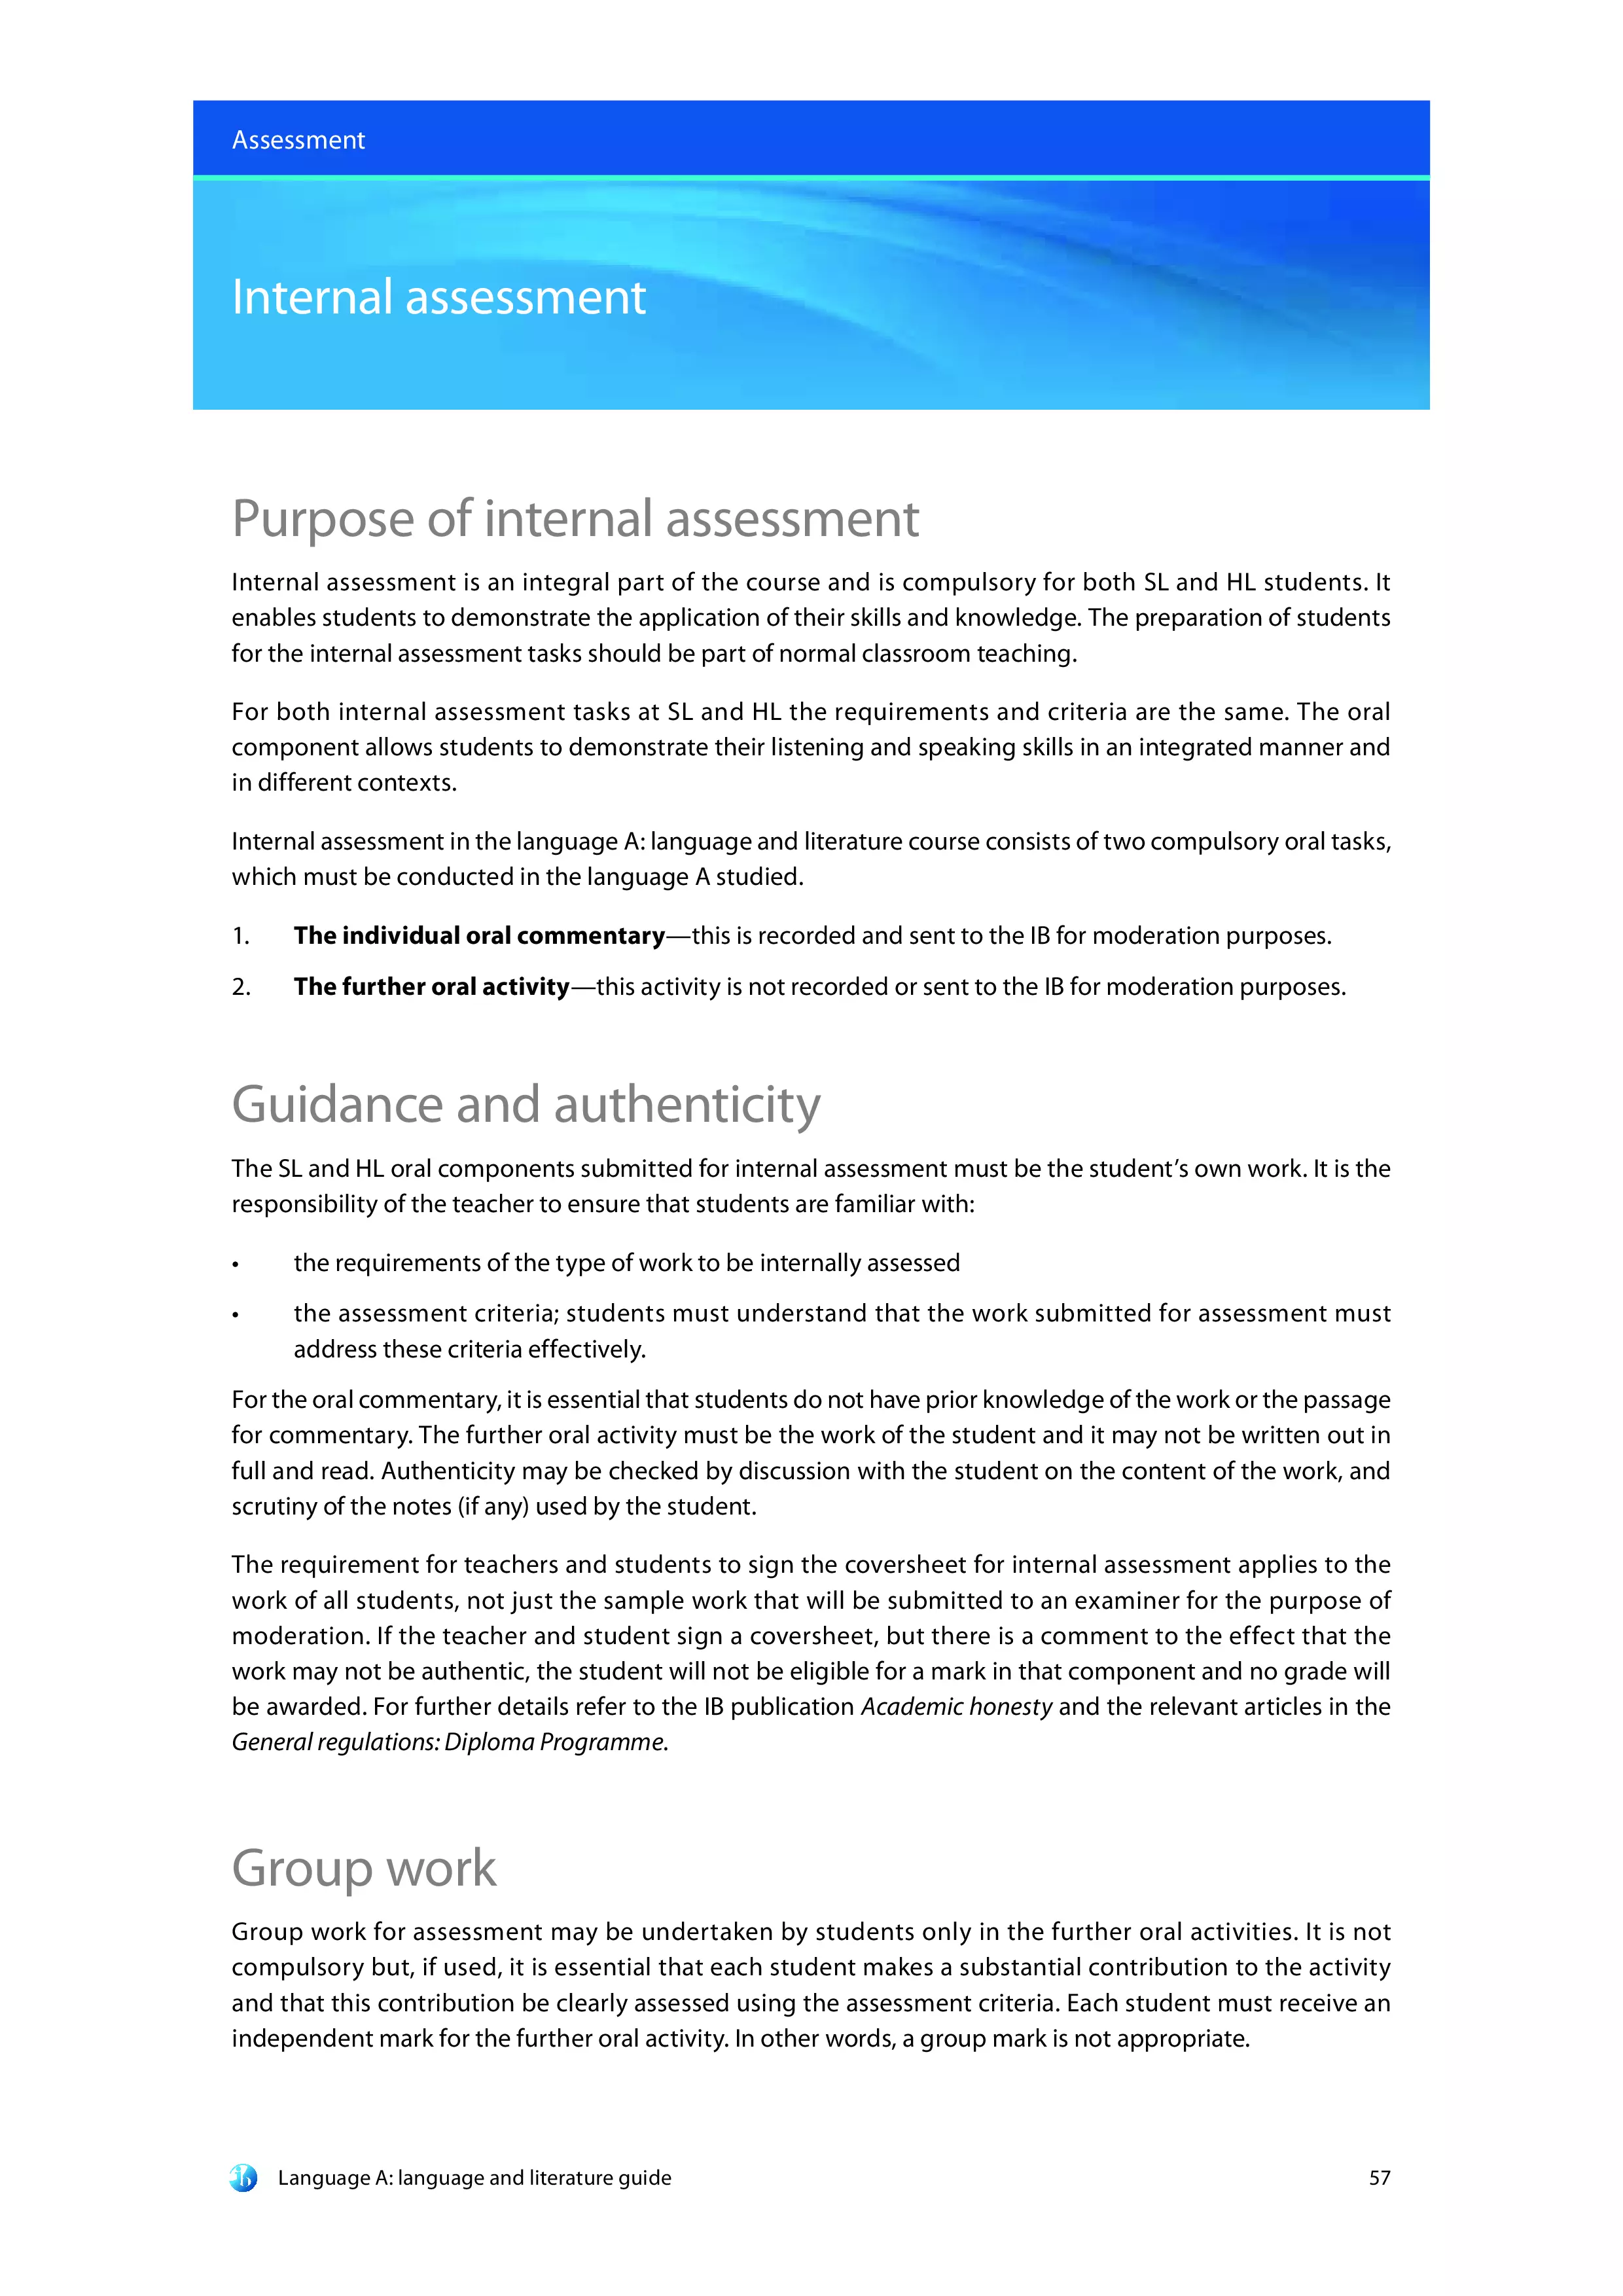 IB English A Internal Assessment guide download preview